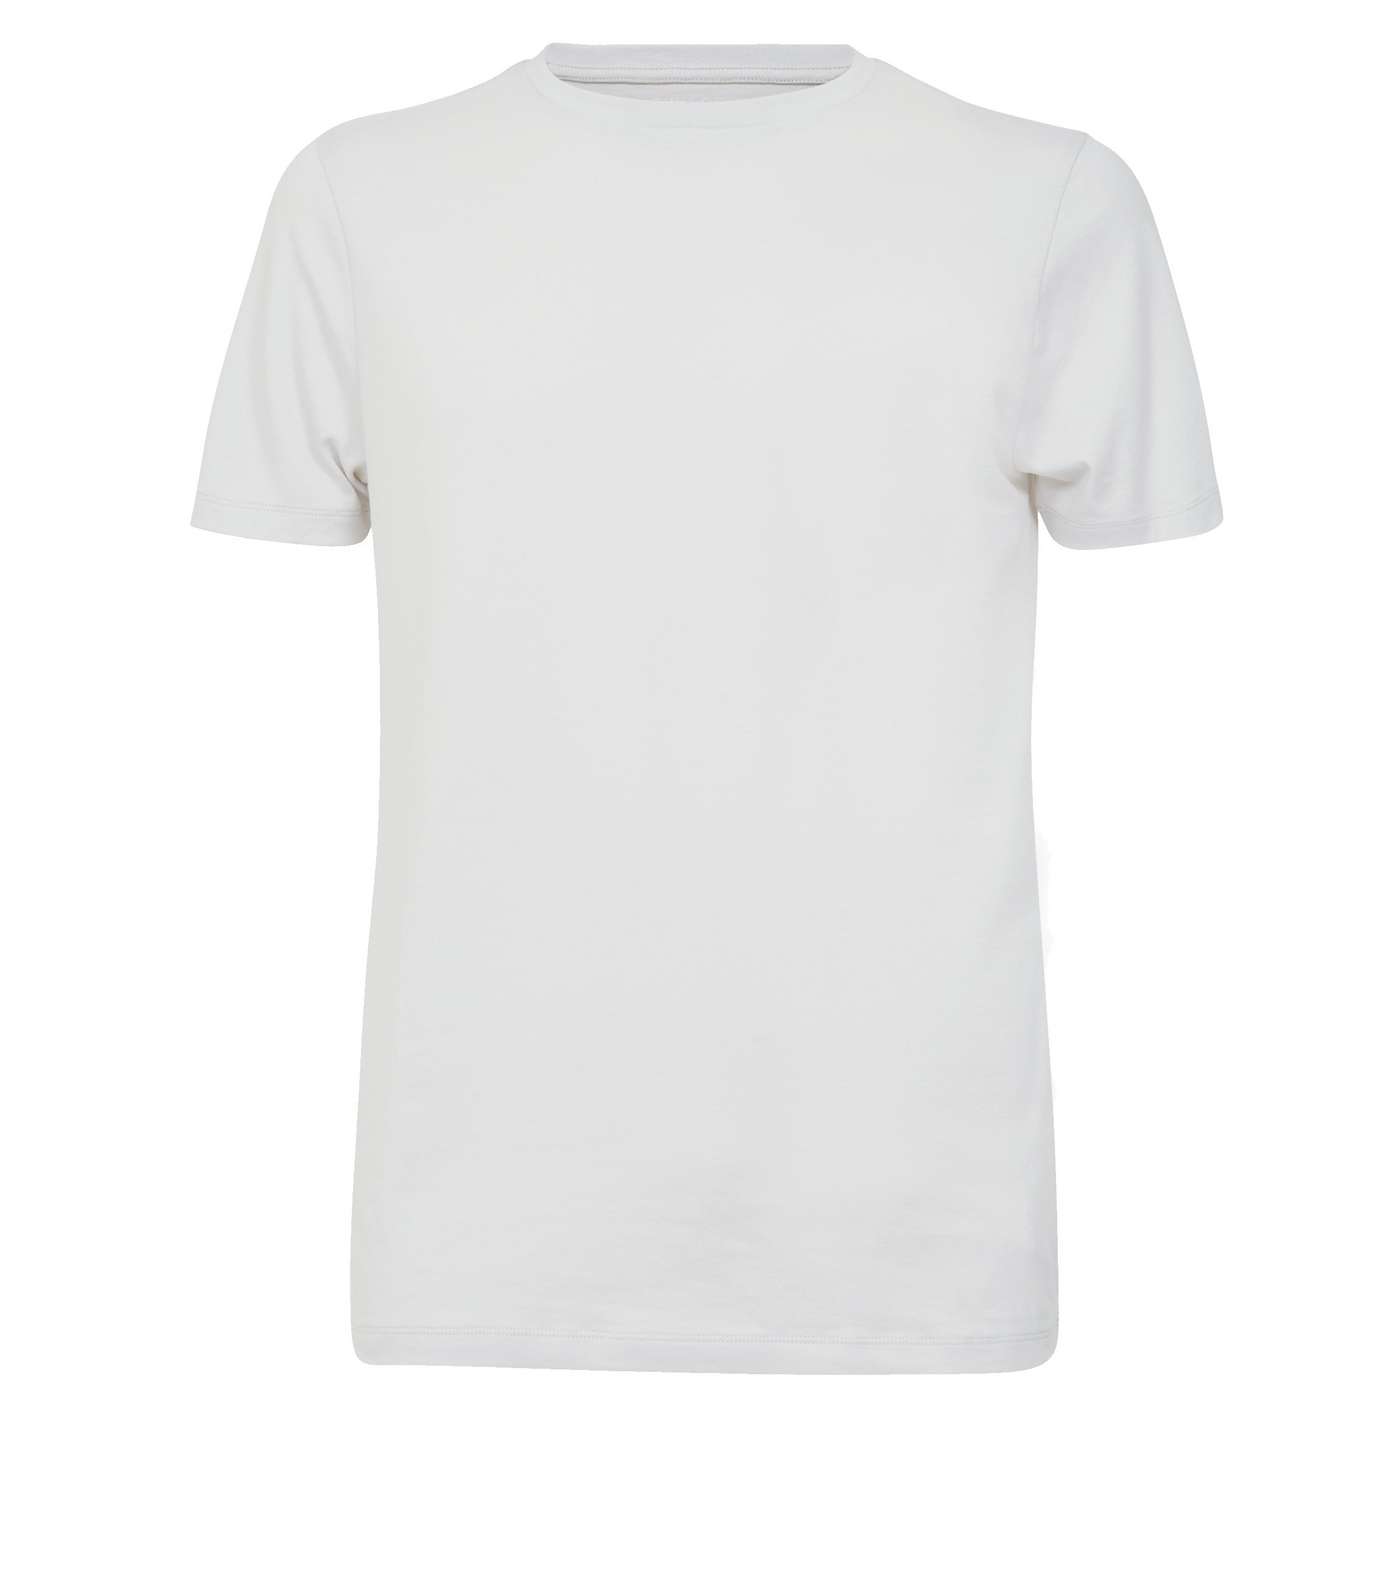 Pale Grey Short Sleeve Muscle Fit T-Shirt Image 4